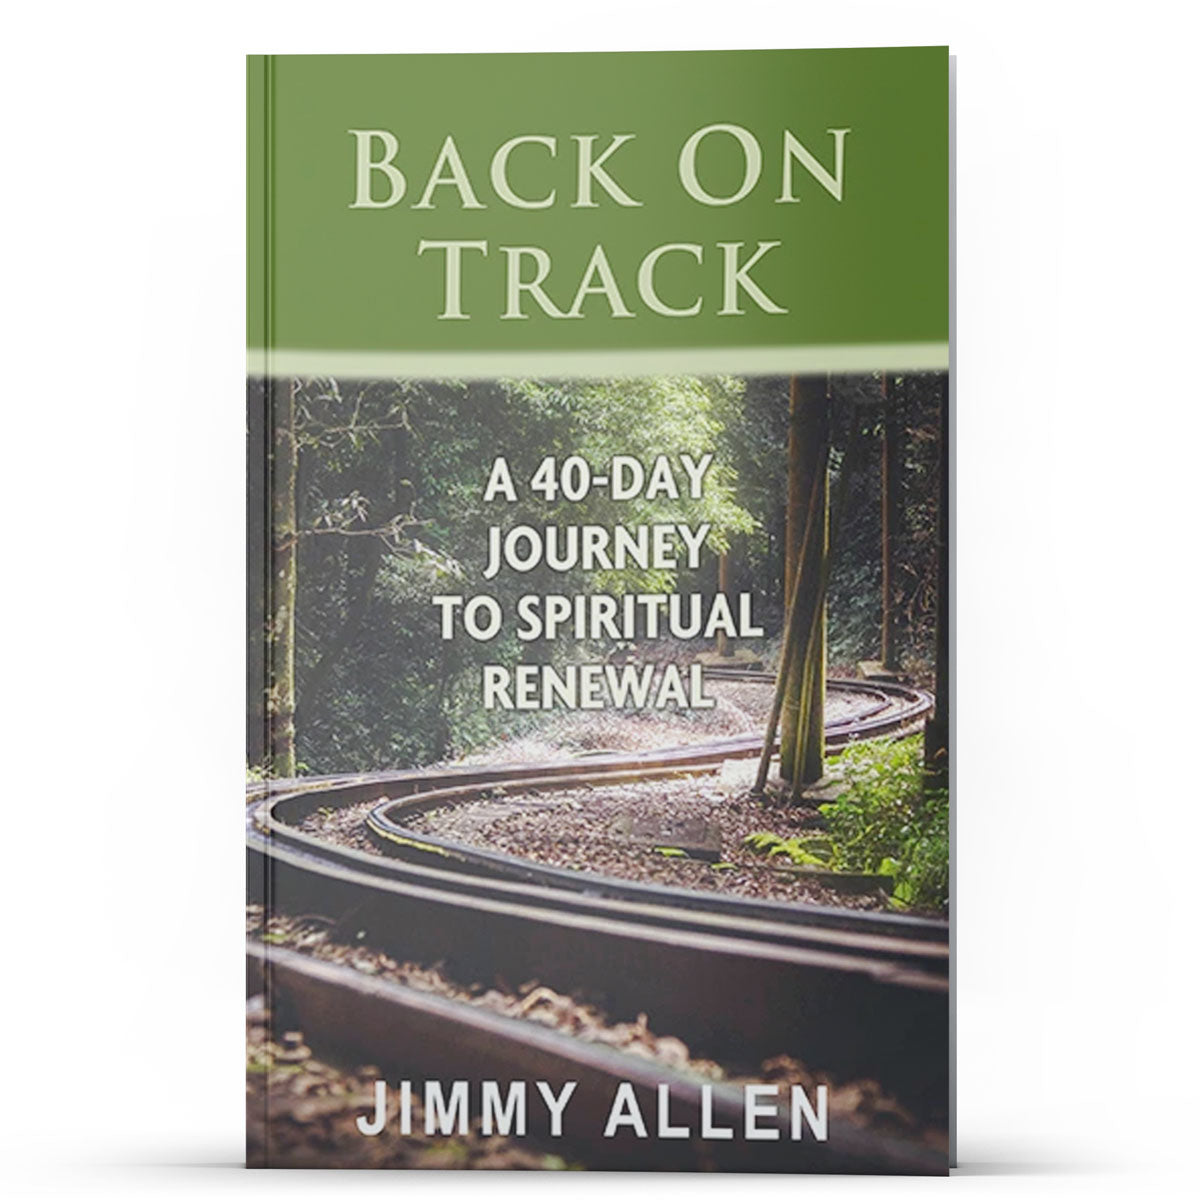 Back on Track—A 40-Day Journey to Spiritual Renewal (New Edition) - Illumination Publishers